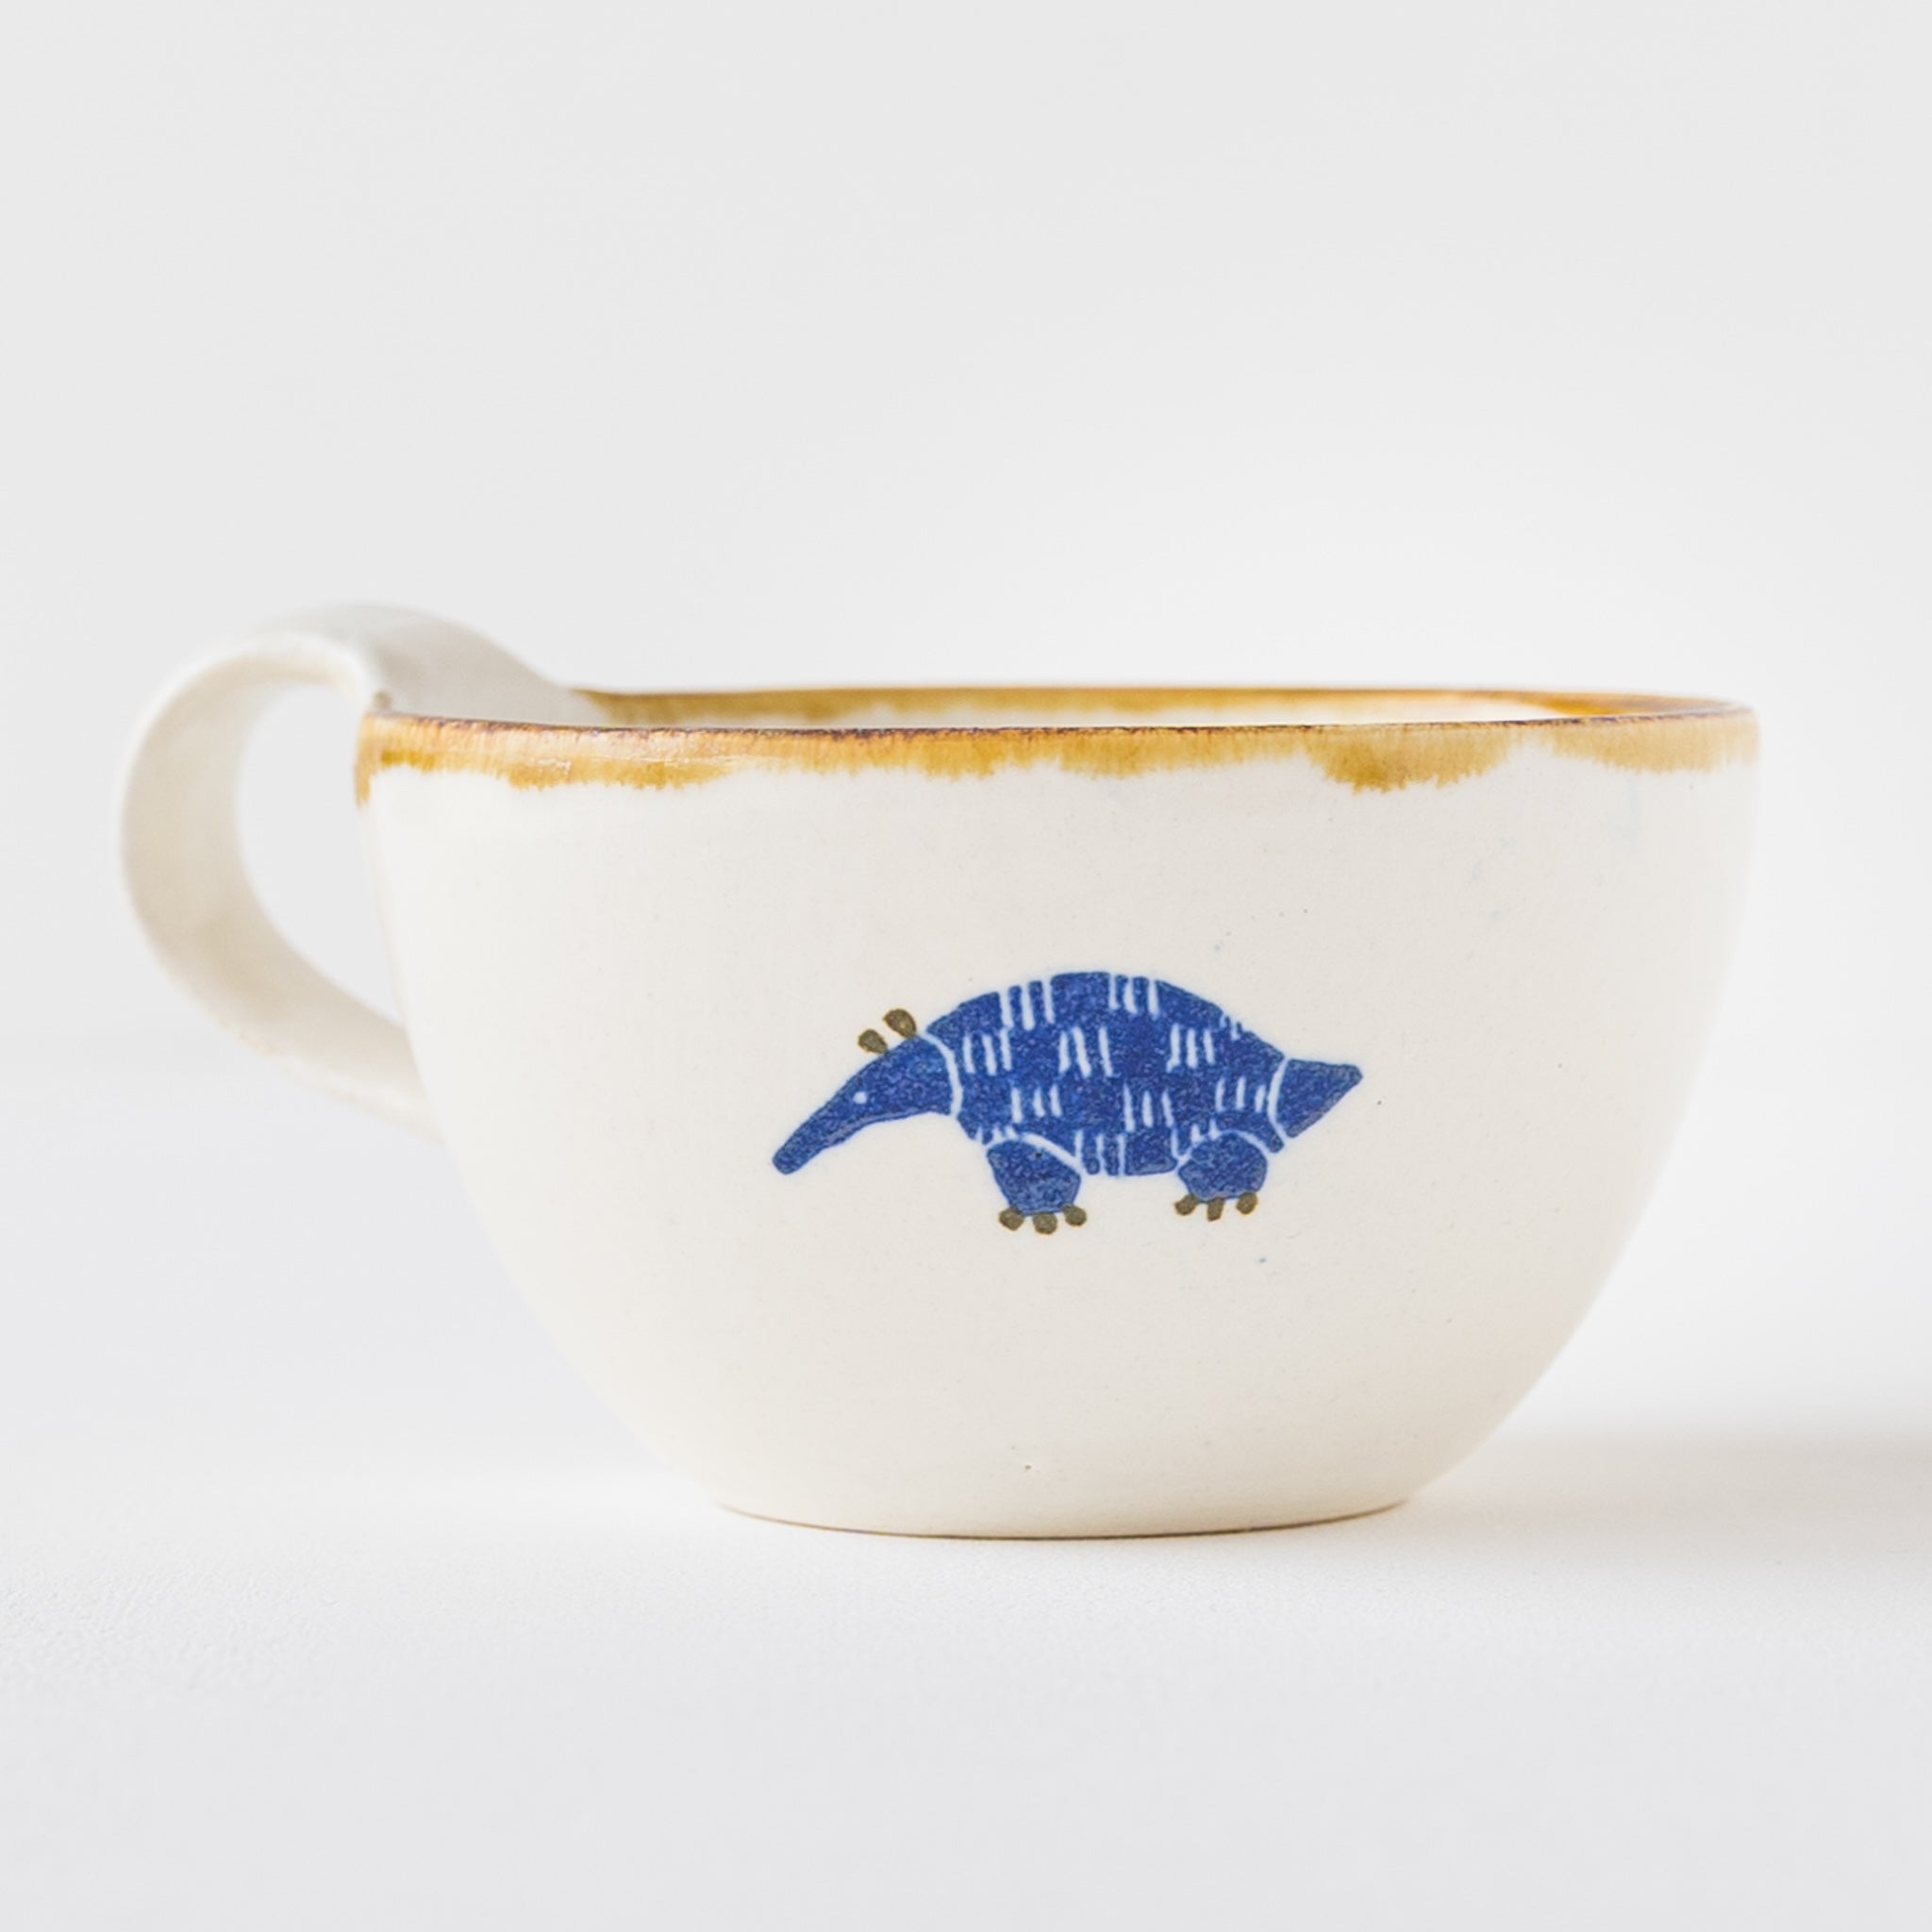 A mug from Yasumi Kobo where you can relax with Japanese paper-dyed anteaters